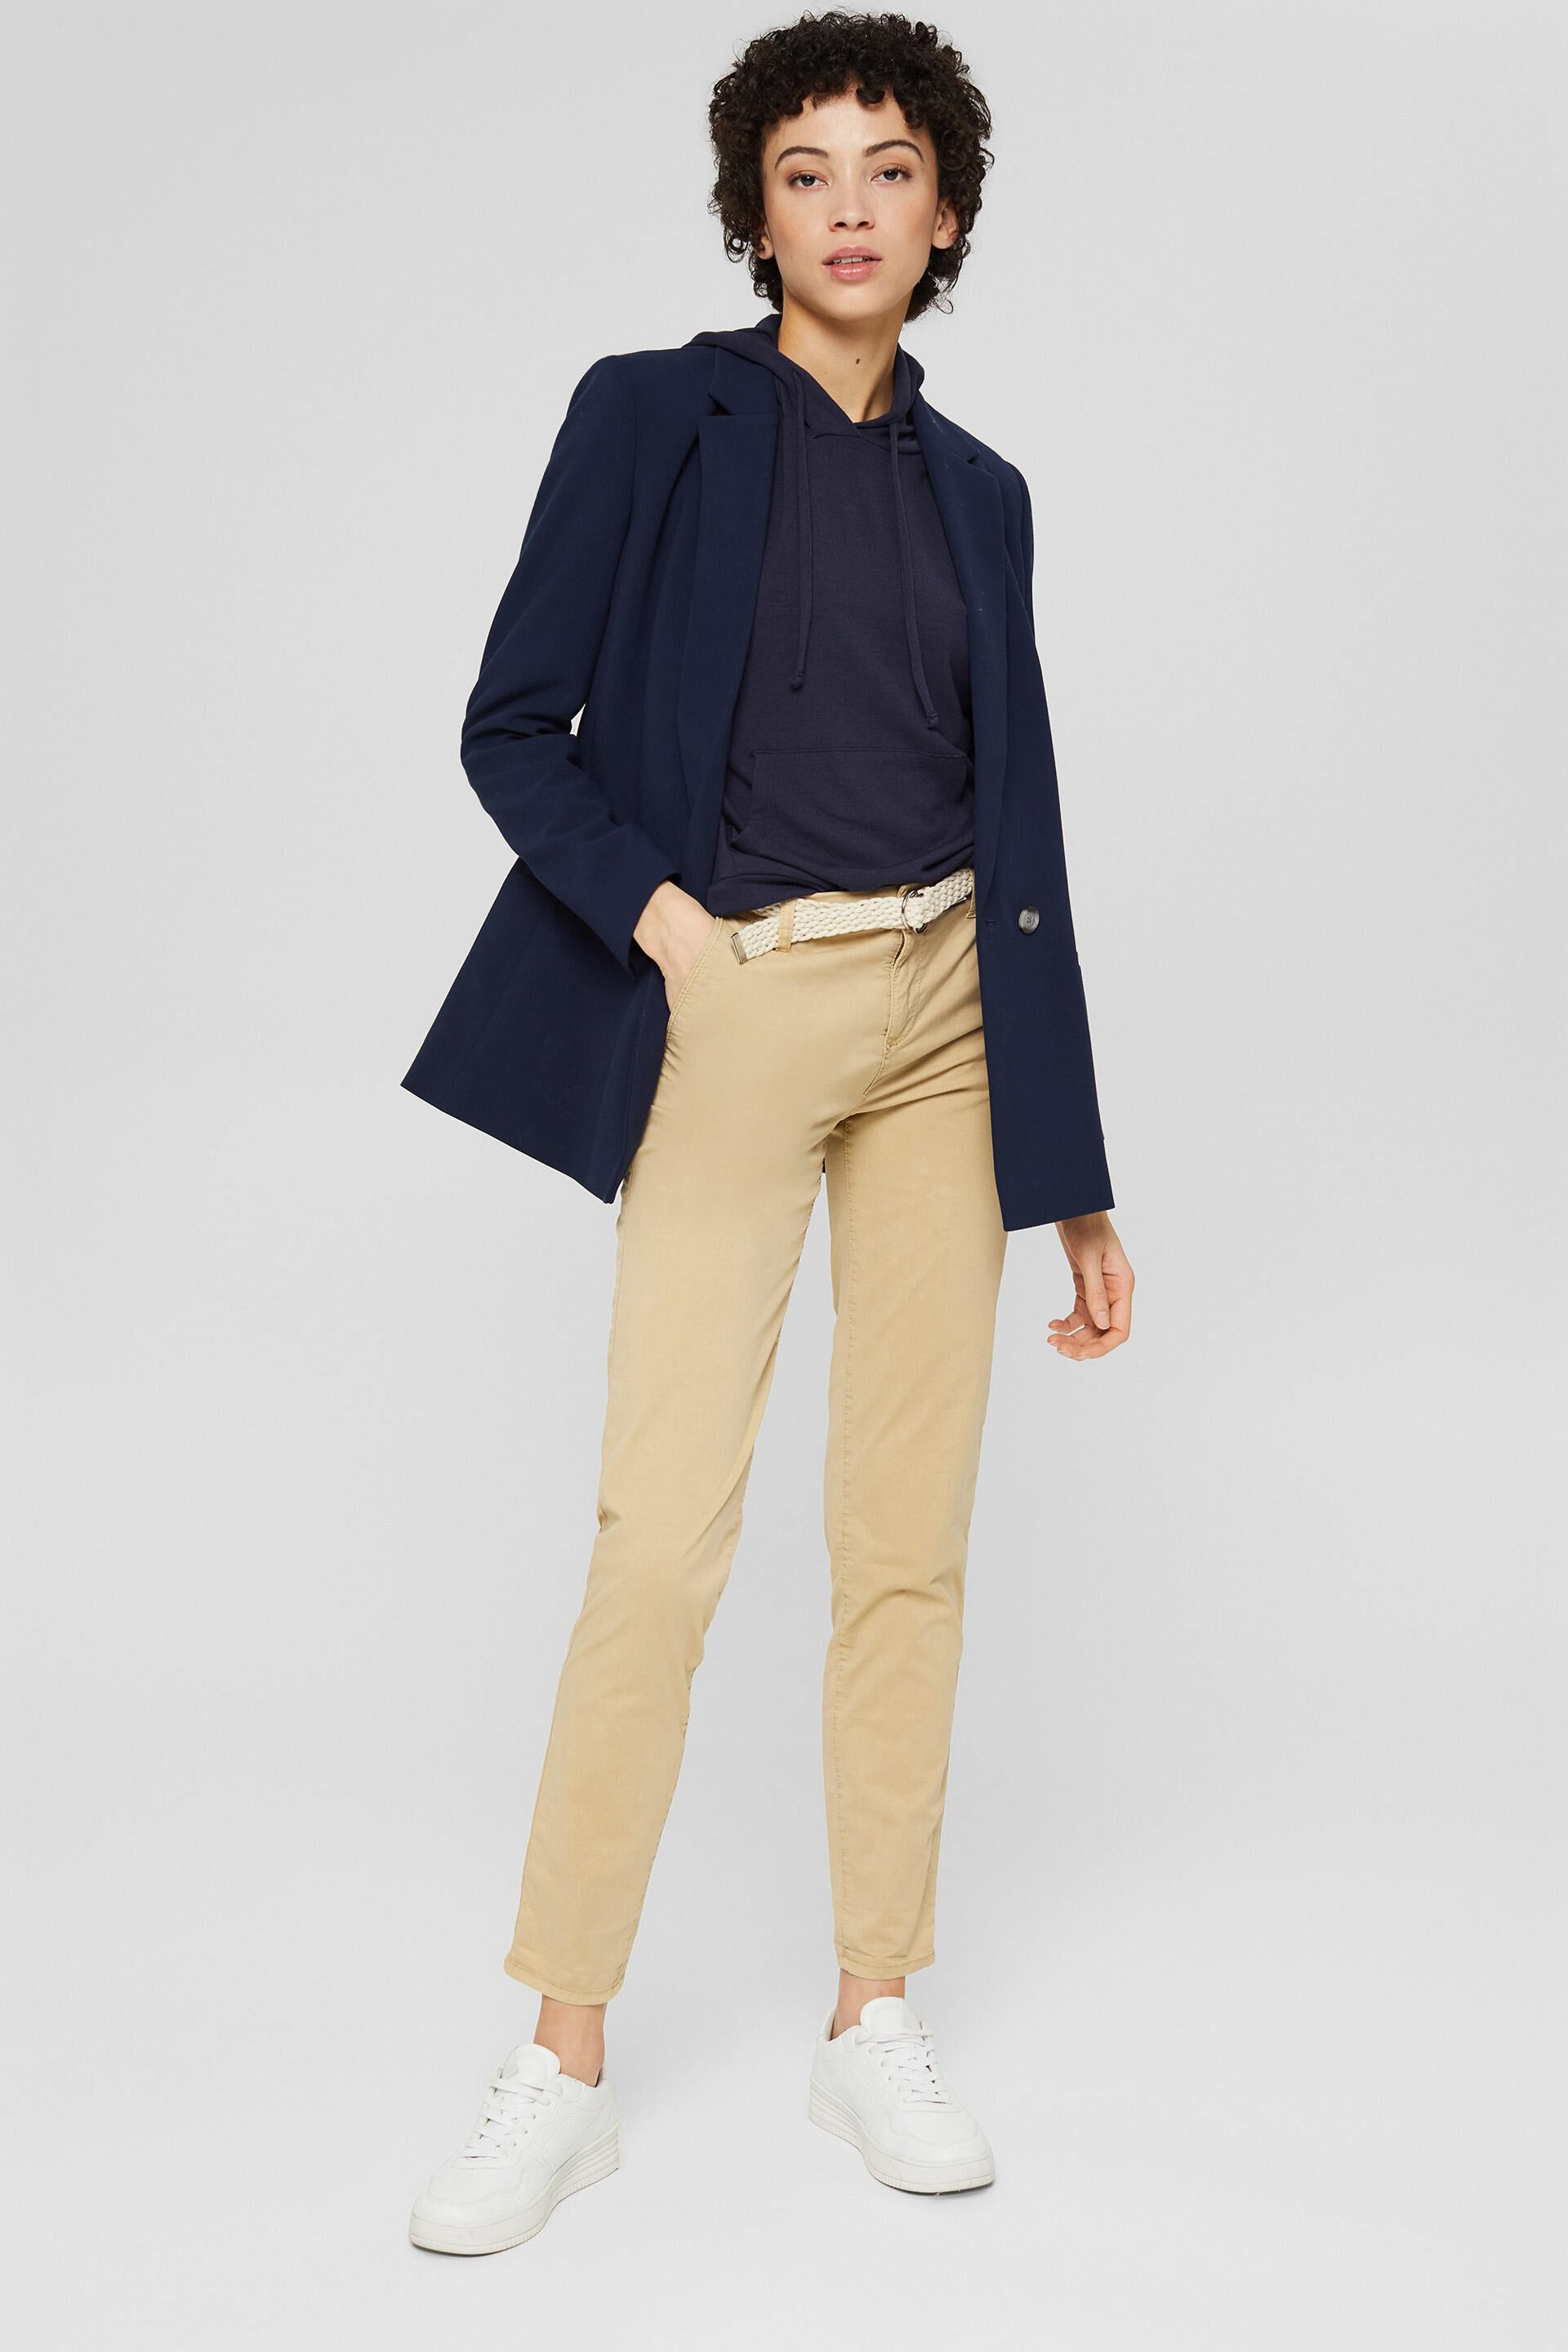 Esprit Collection 101eo1b308 Trouser in Blue Womens Trousers Slacks and Chinos Slacks and Chinos Esprit Trousers 